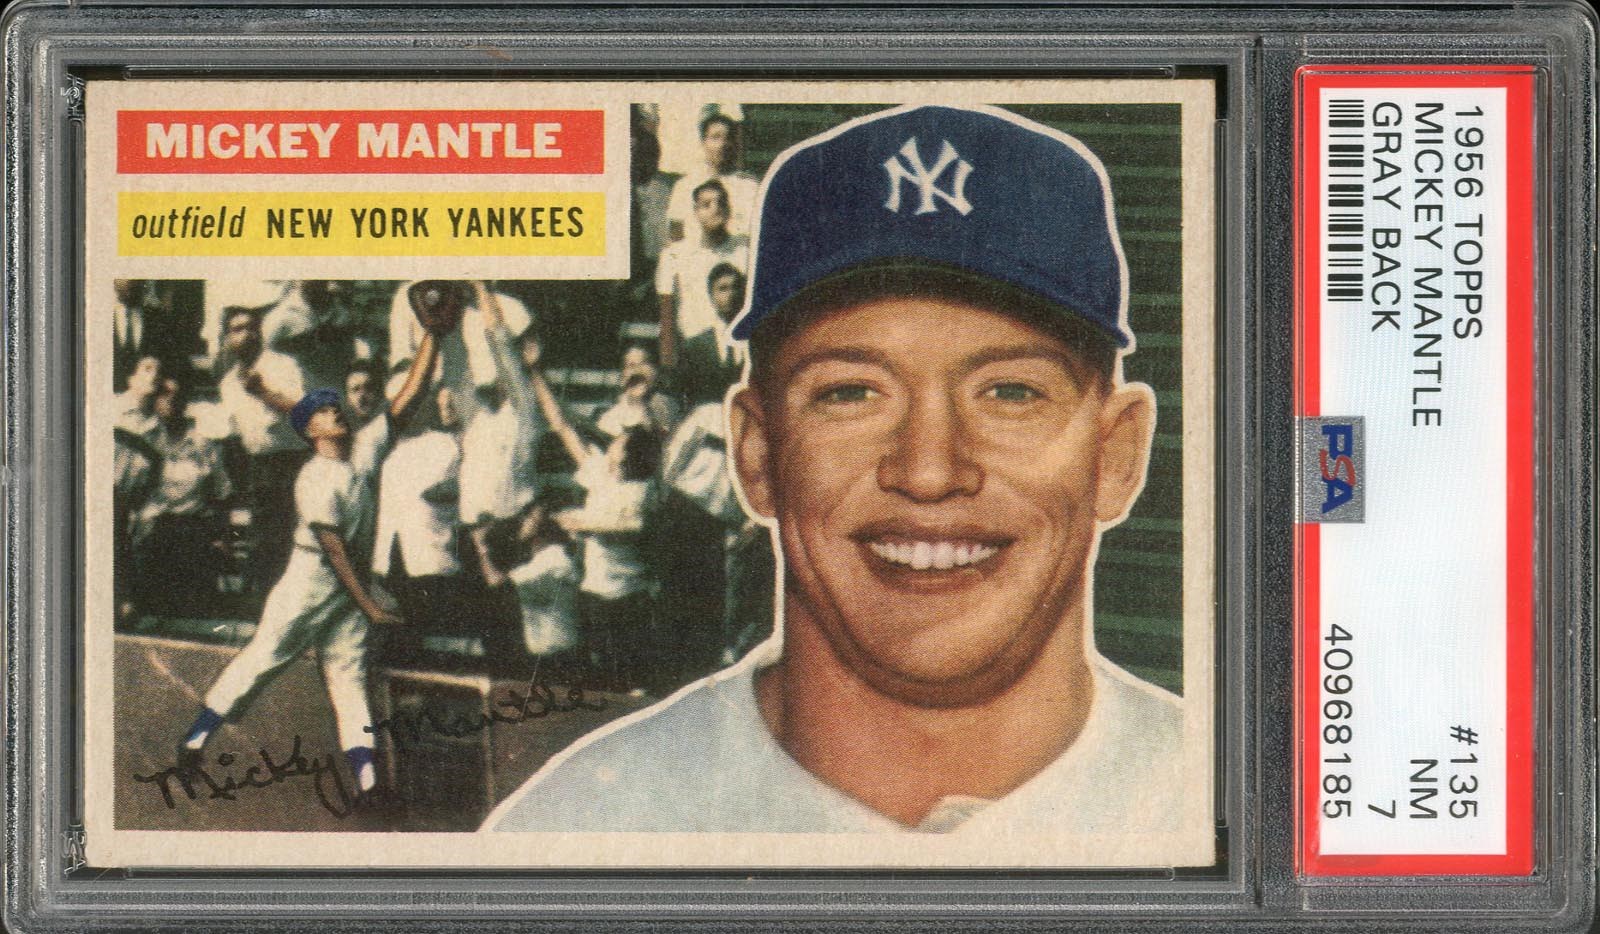 Baseball and Trading Cards - 1956 Topps Mickey Mantle Gray Back Version (PSA 7)